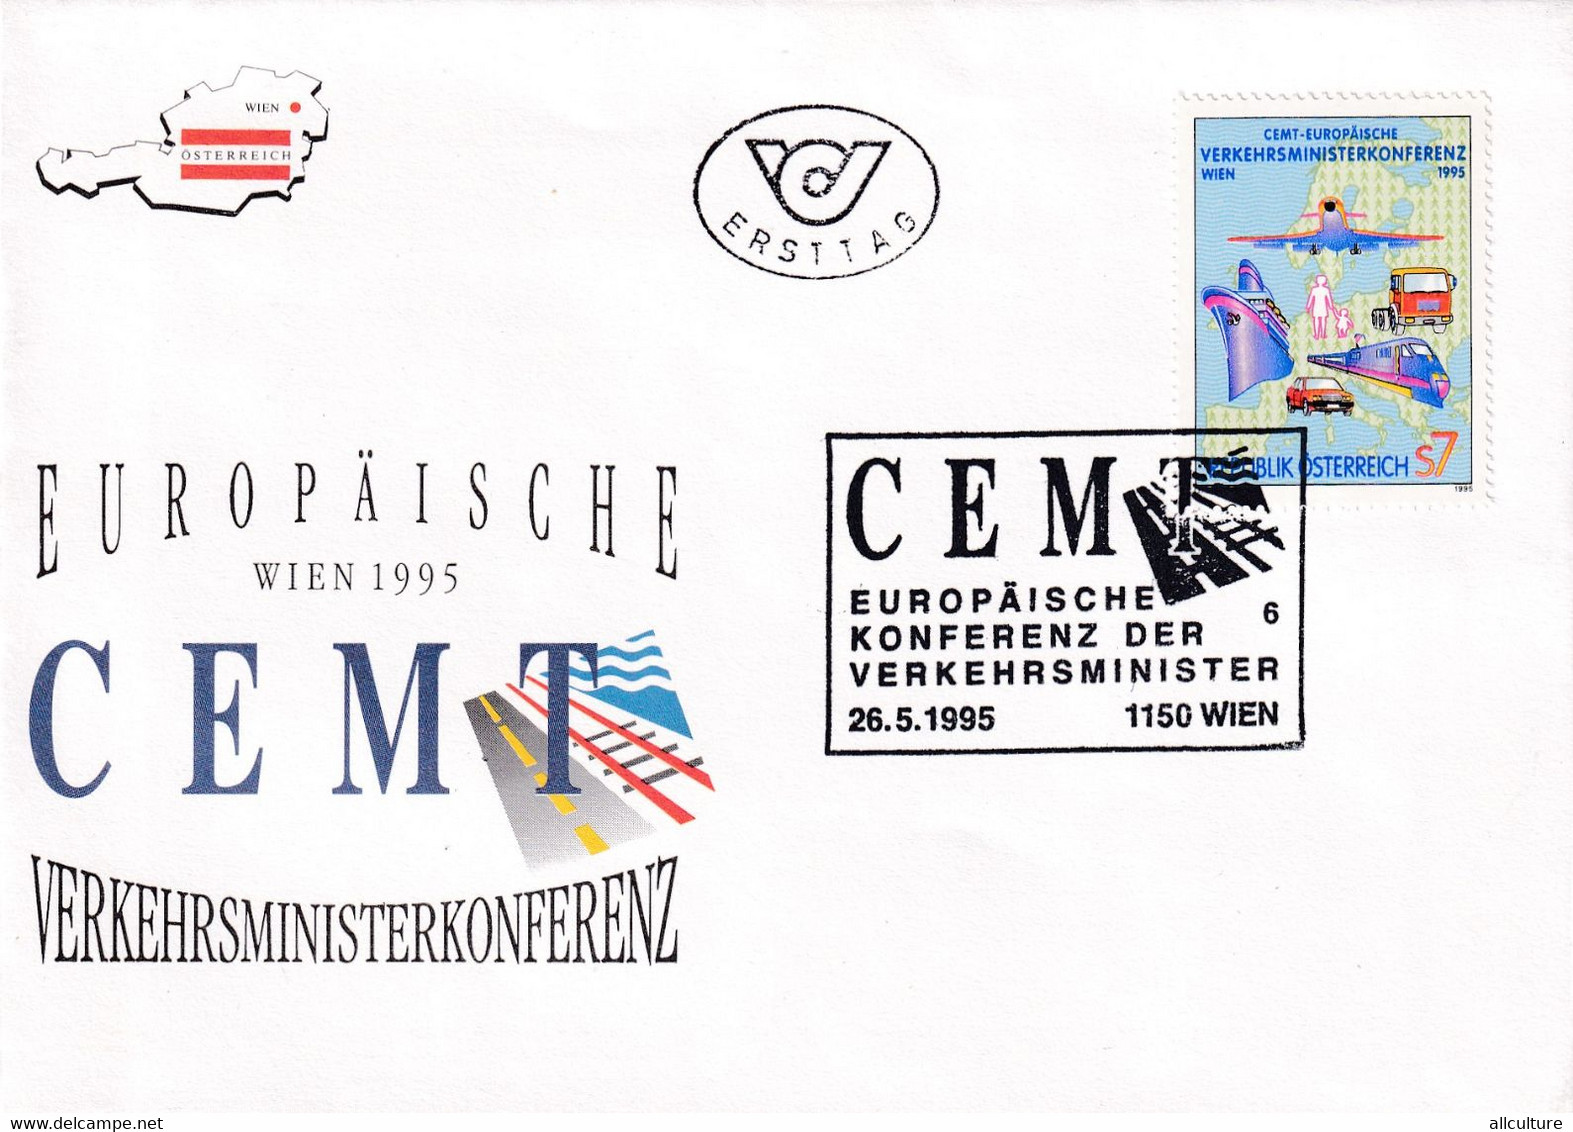 A8203- EUROPEAN CONFERENCE OF THE MINISTERS FOR TRANSPORT 1995  REPUBLIC OESTERREICH USED STAMP ON COVER AUSTRIA - Cartas & Documentos